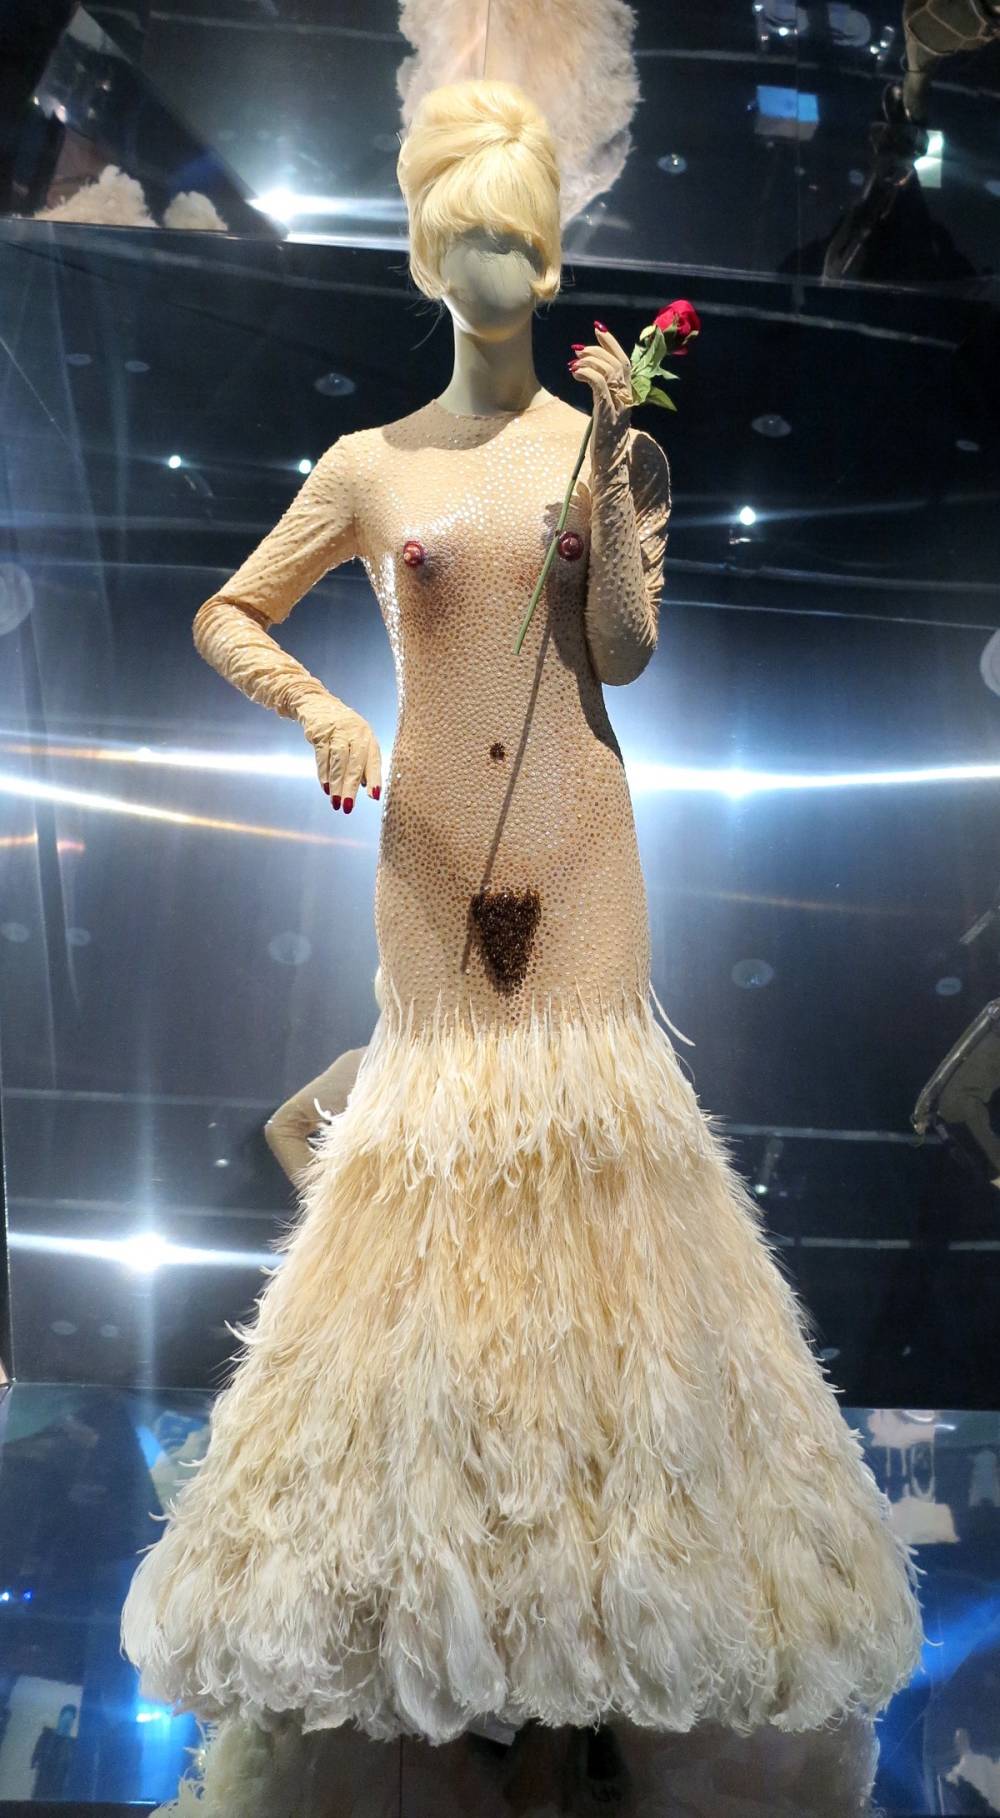  Jean Paul Gaultier, The Naked Dress from Bad Education 